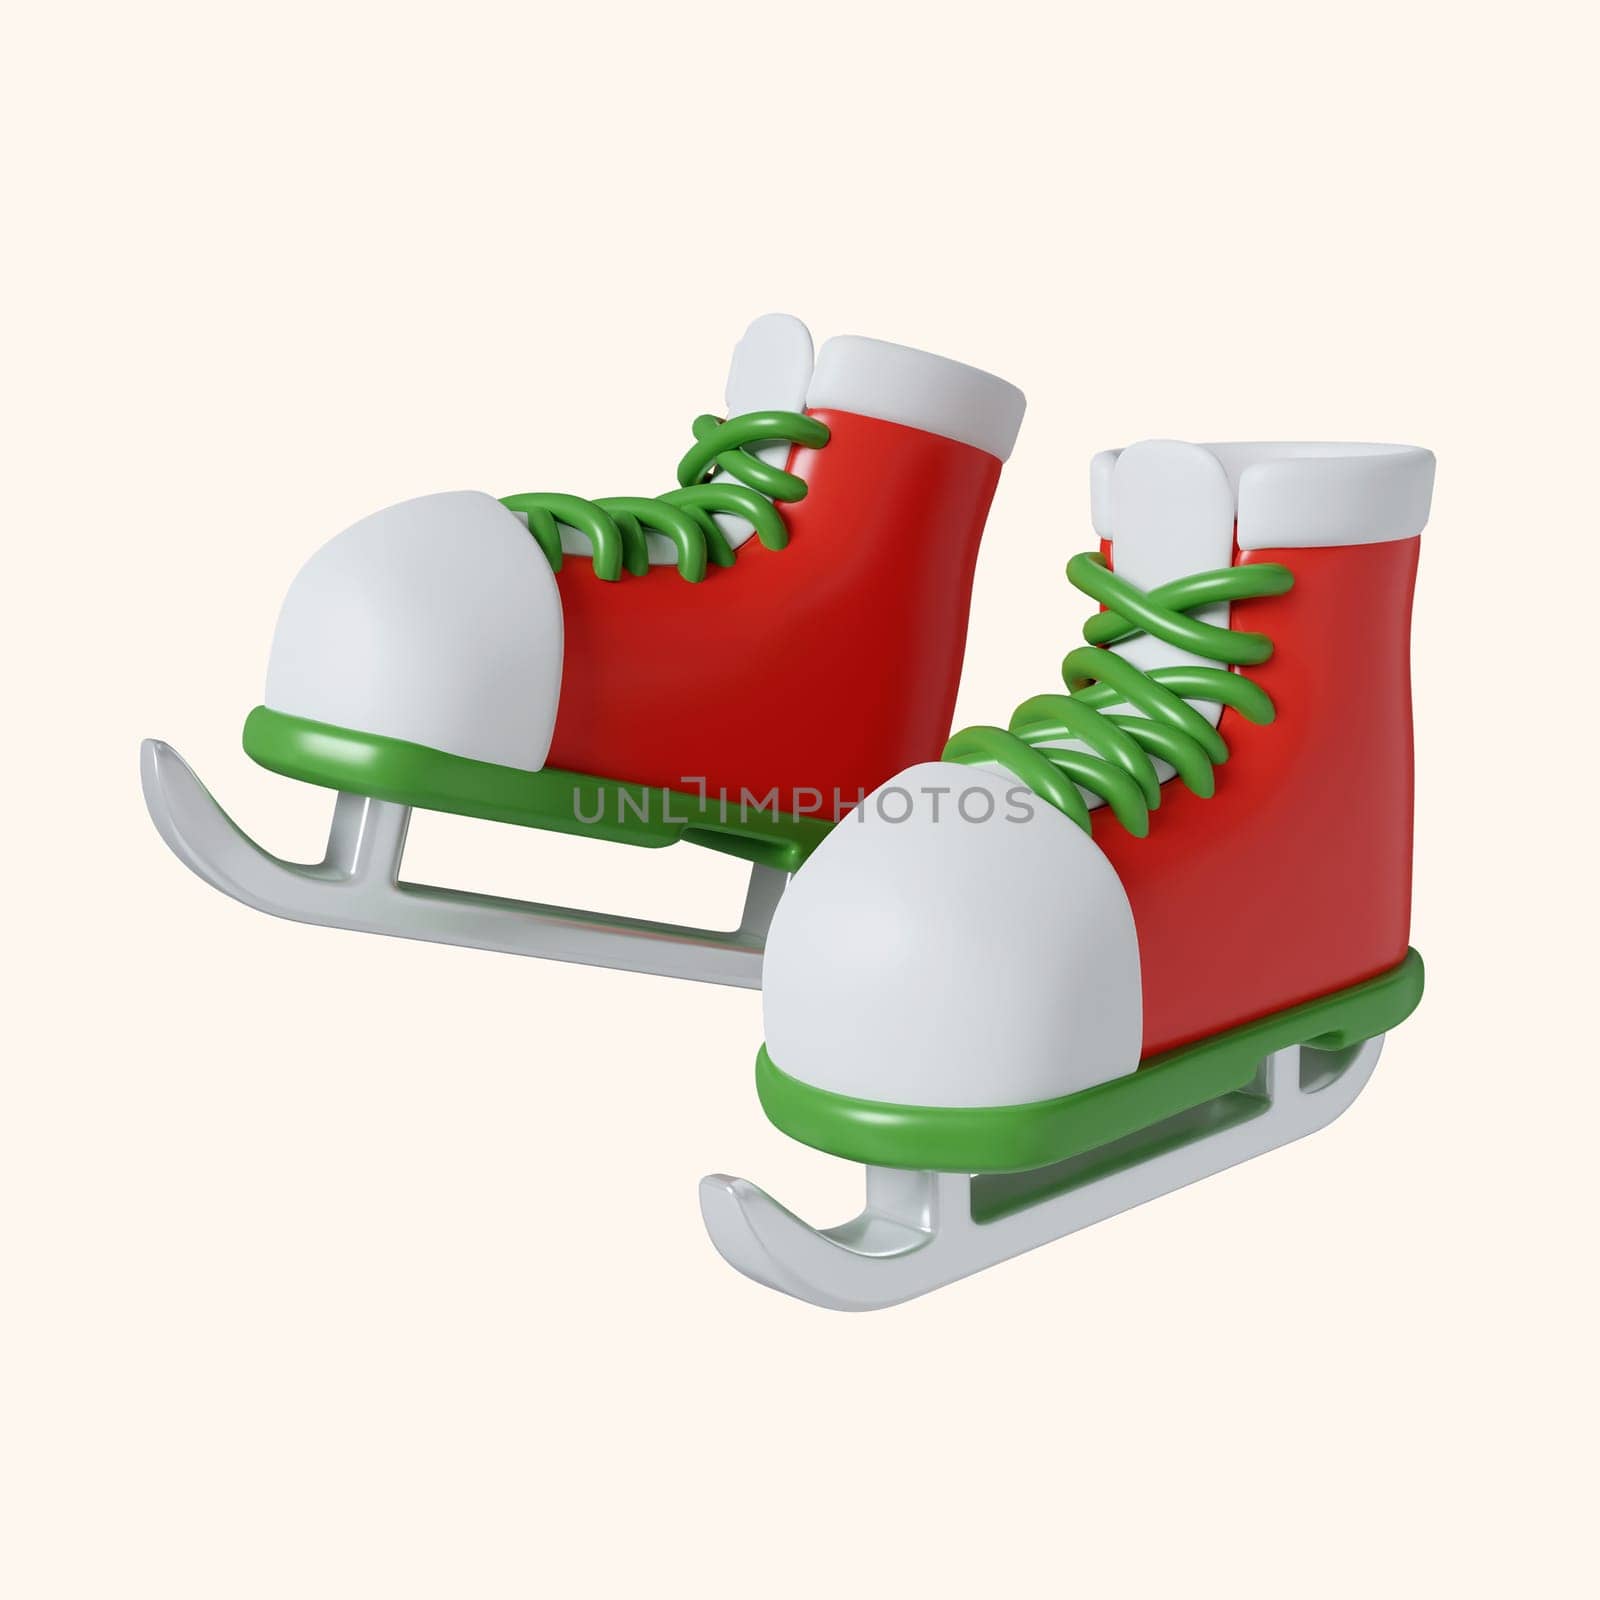 3d Christmas skate boots icon. minimal decorative festive conical shape tree. New Year's holiday decor. 3d design element In cartoon style. Icon isolated on white background. 3d Christmas candy icon. minimal decorative festive conical shape tree. New Year's holiday decor. 3d design element In cartoon style. Icon isolated on white background. 3d illustration by meepiangraphic